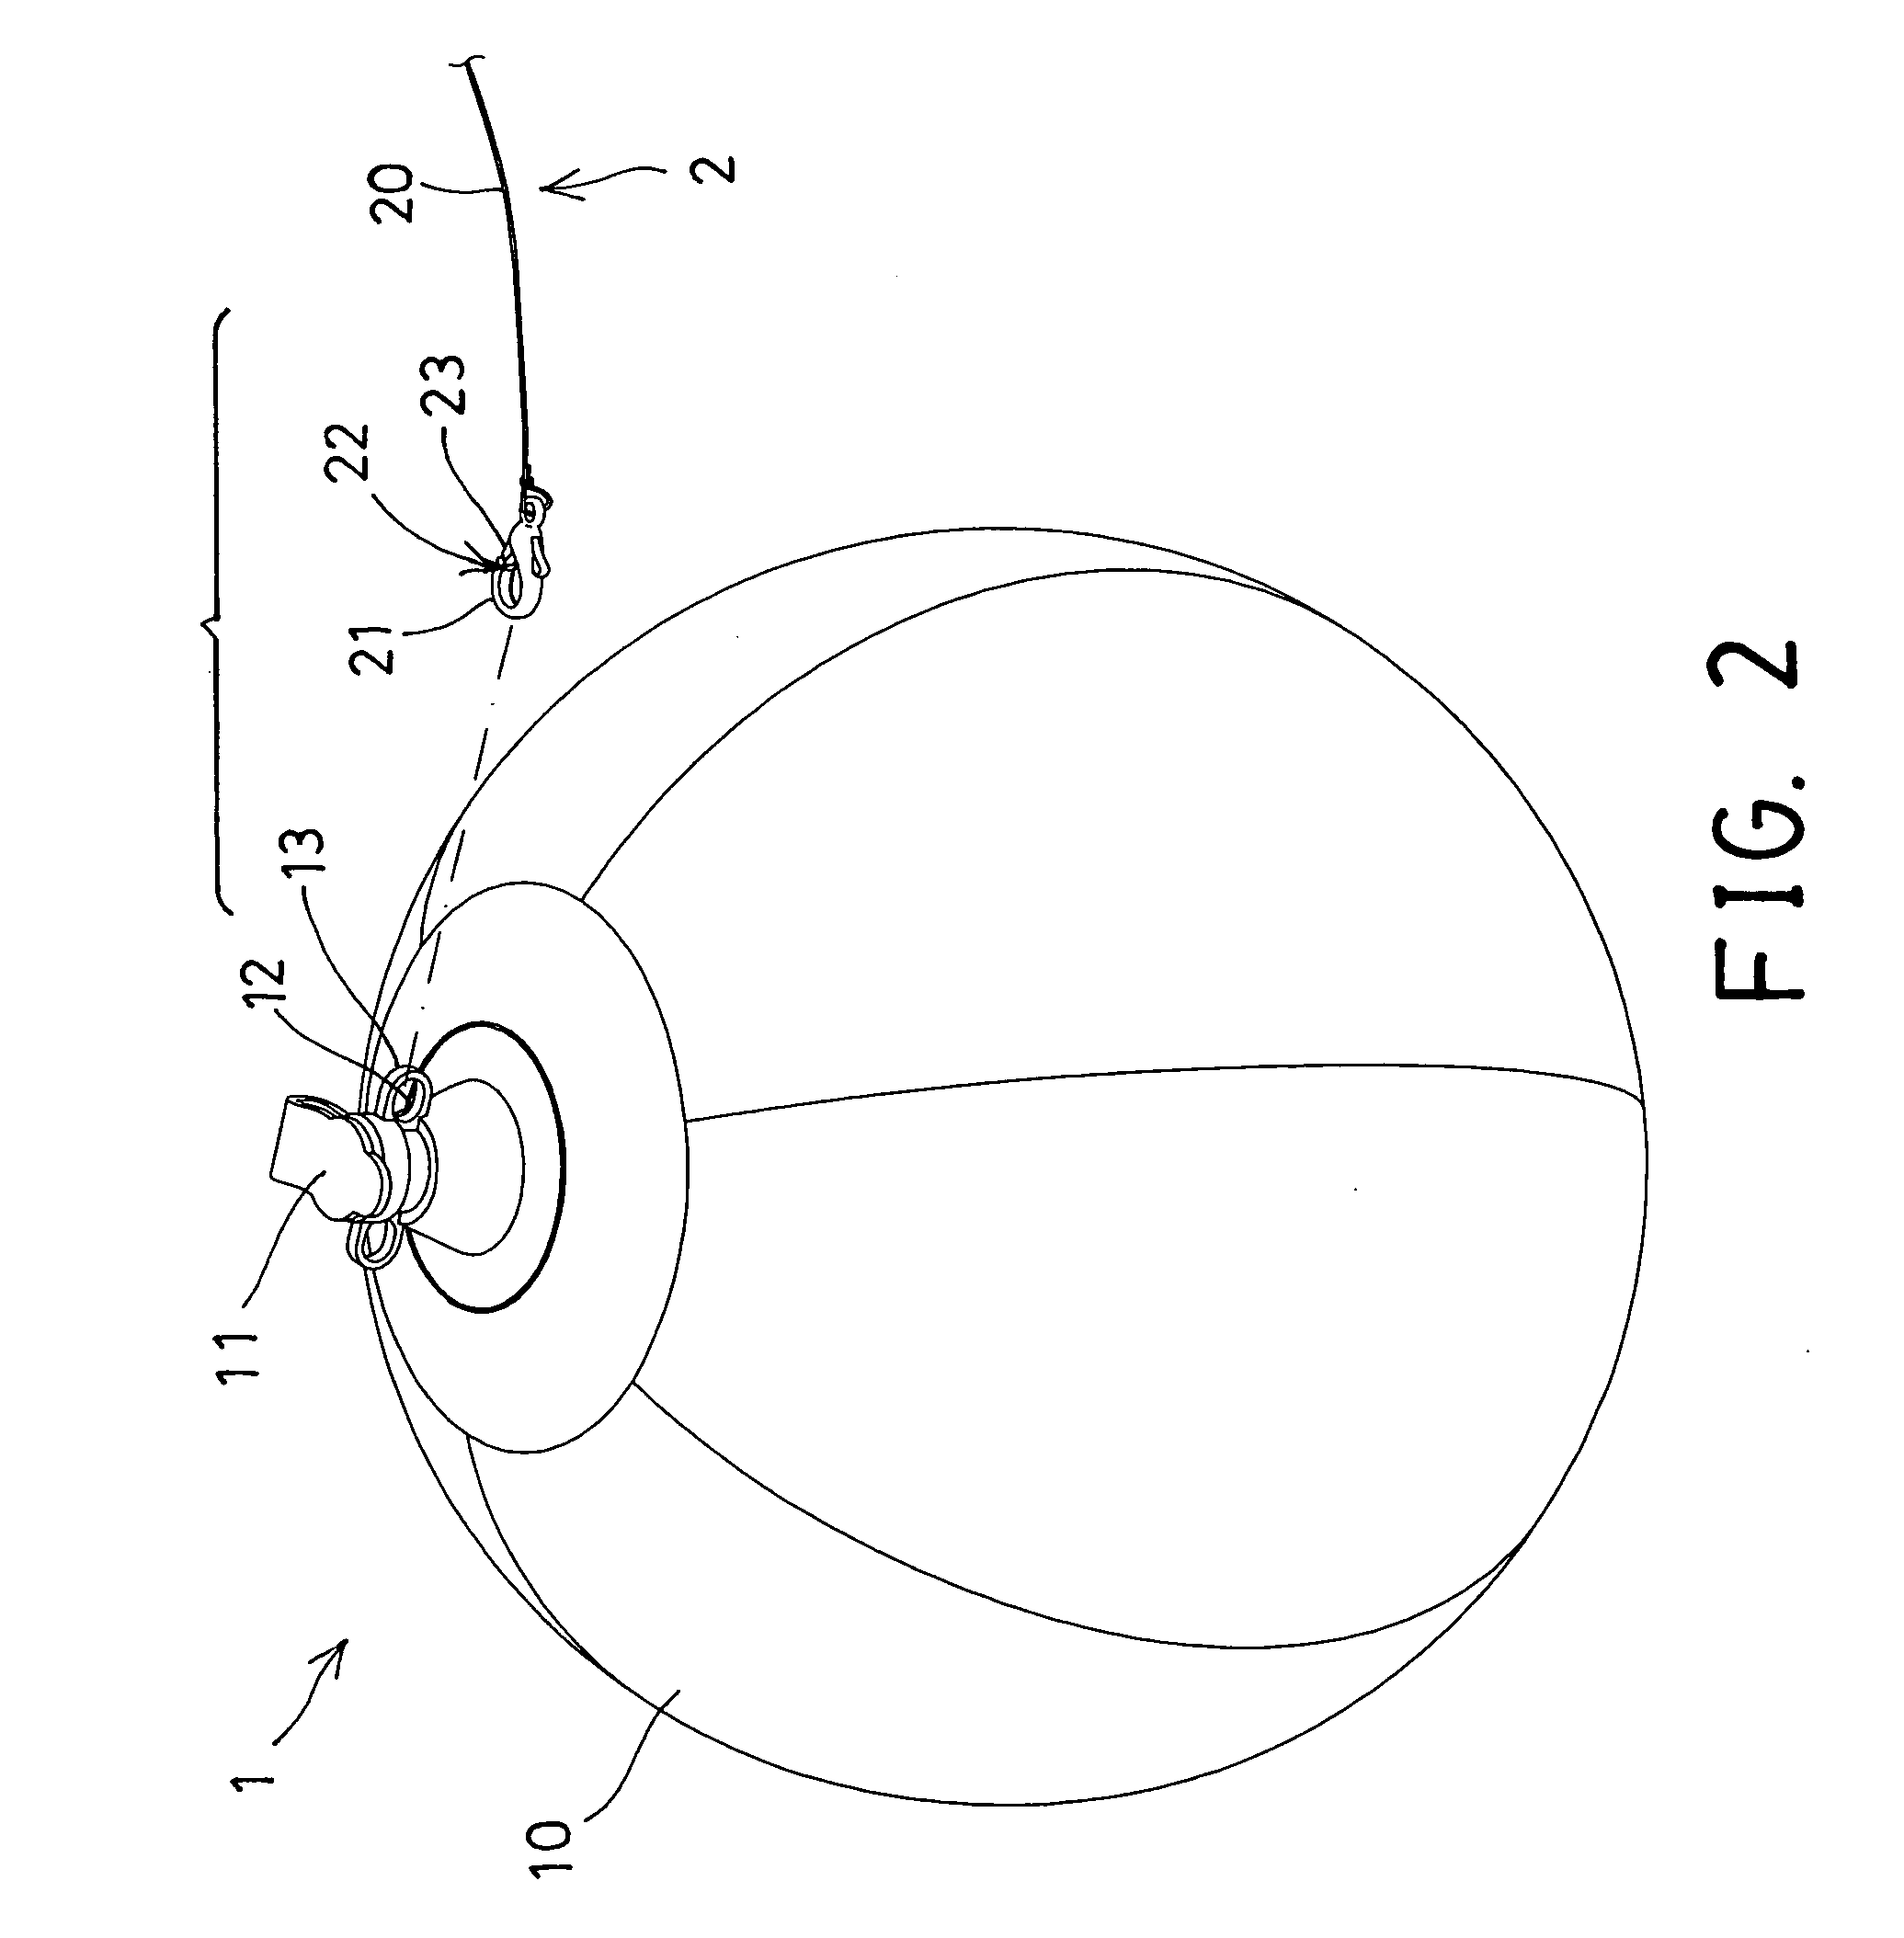 Coupling assembly for inflating members